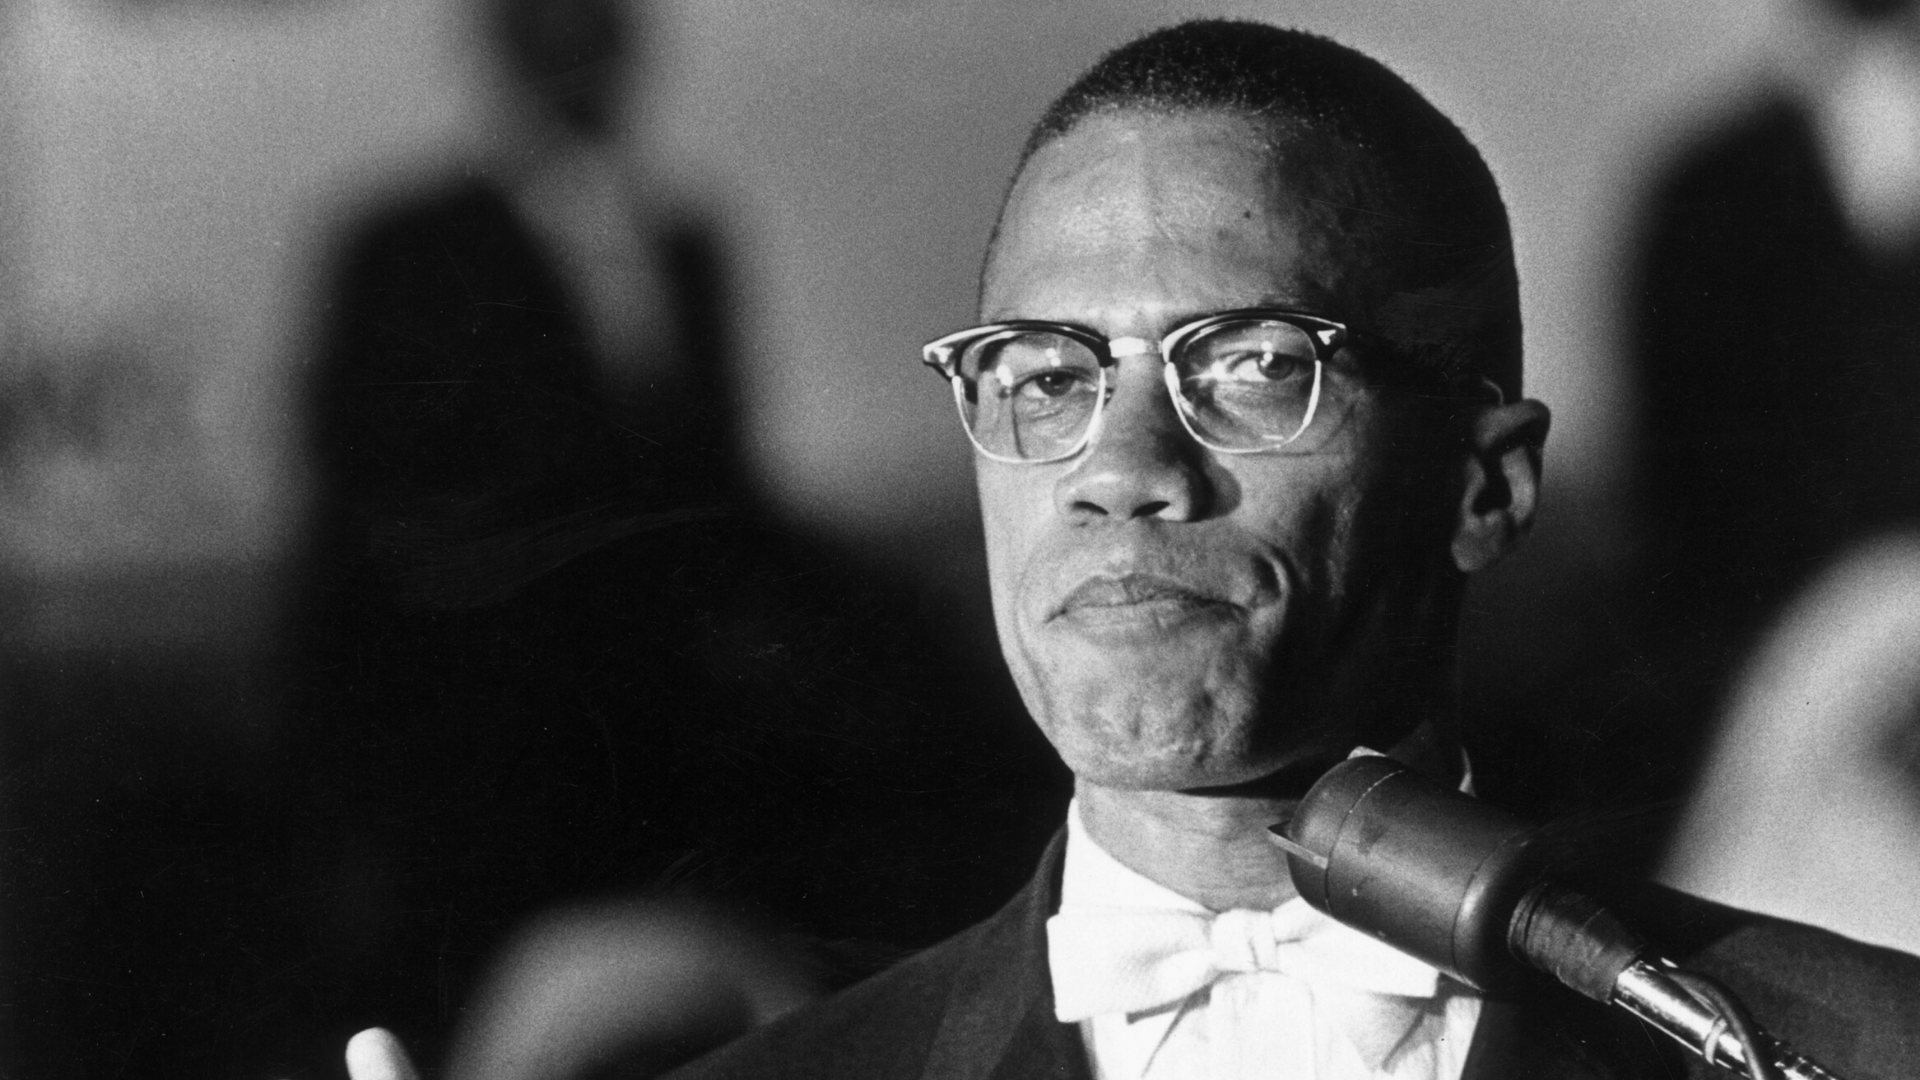 The world needs these Malcolm X quotes right now